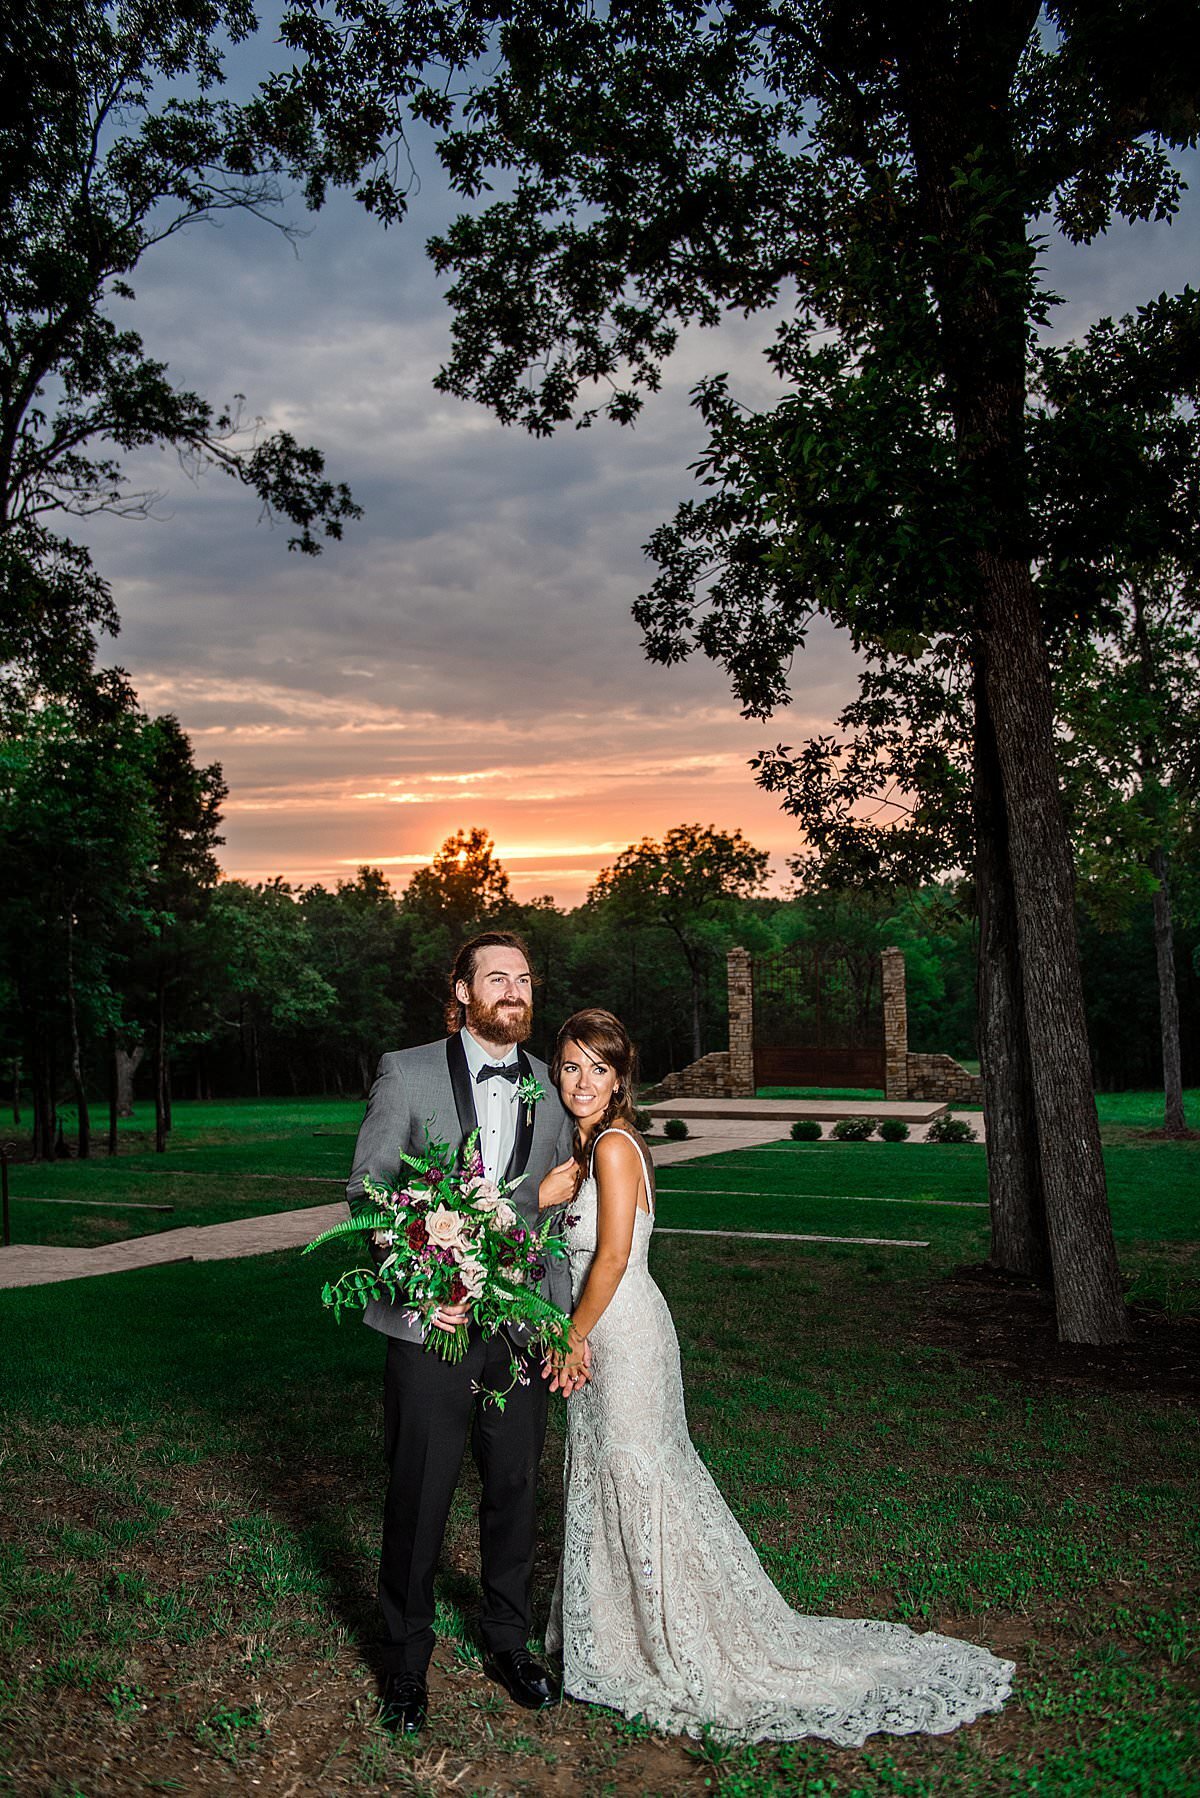 Couple posing together at Stone Gate Farm wedding venue at sunset